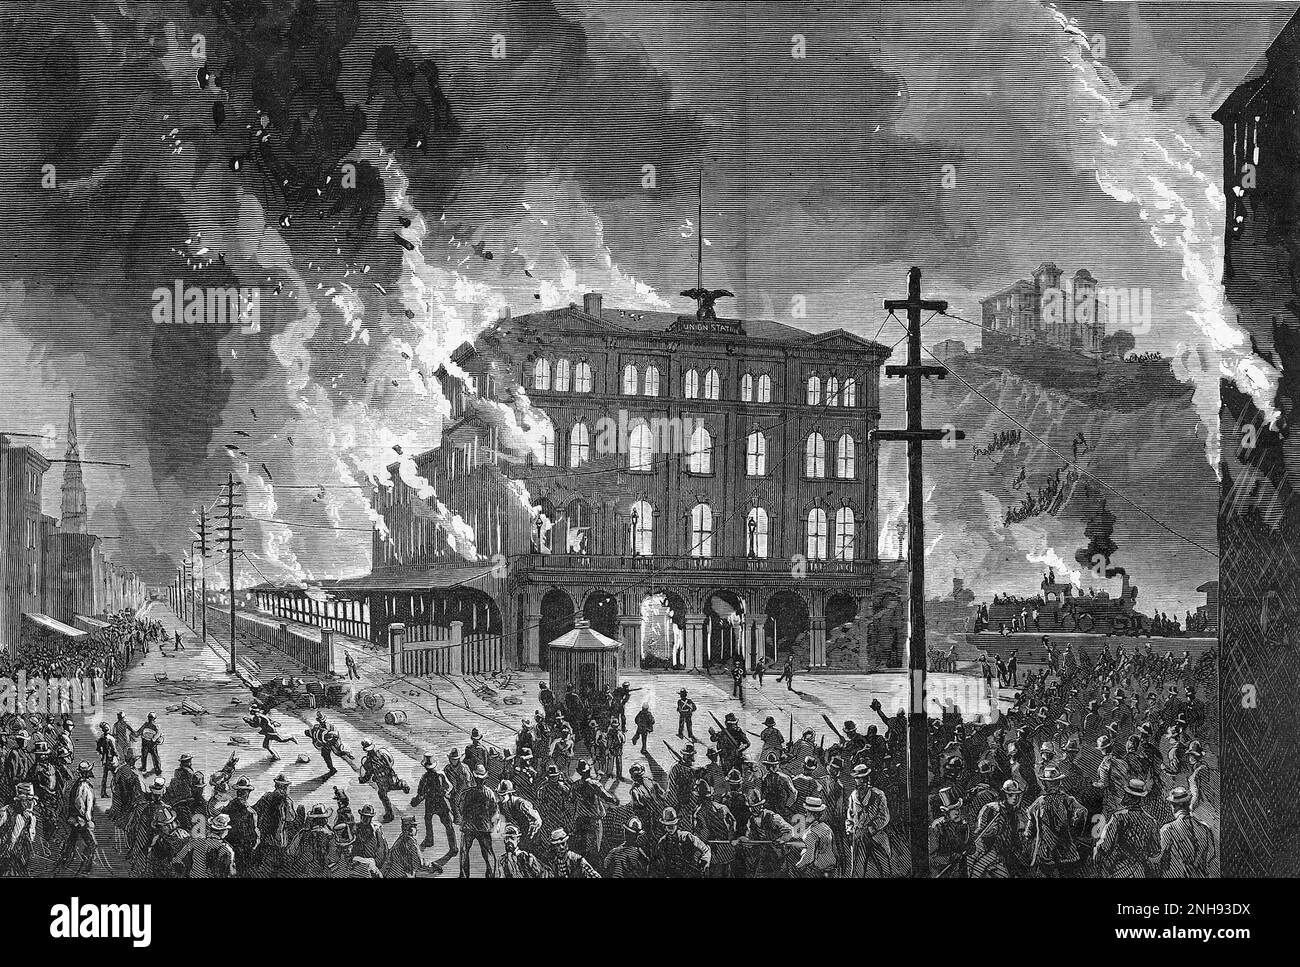 The Great Railroad Strike of 1877 began on July 14 in Martinsburg, West Virginia, after the B&O Railroad cut wages for the third time in a year. It spread to other cities and was ended by federal troops and militia after 52 days. This engraving shows the destruction of the Union Depot, Pittsburgh, PA, 11 August 1877. Illustration from Harper's Weekly. Stock Photo